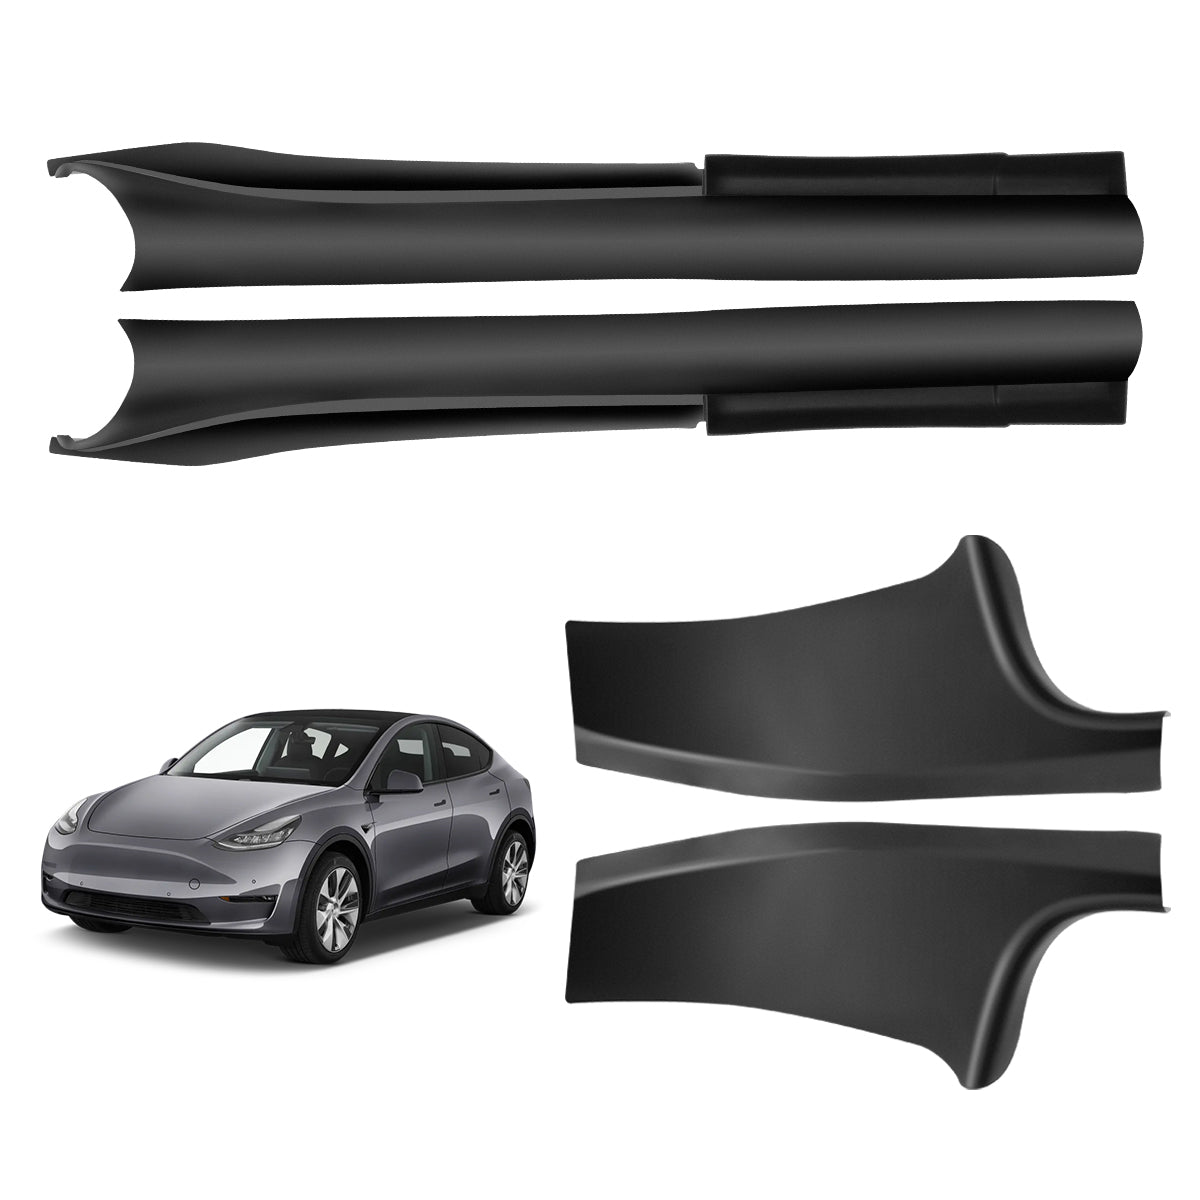 2x PU Leather Rear Door Sill Protector Cover Pad Fit for Tesla